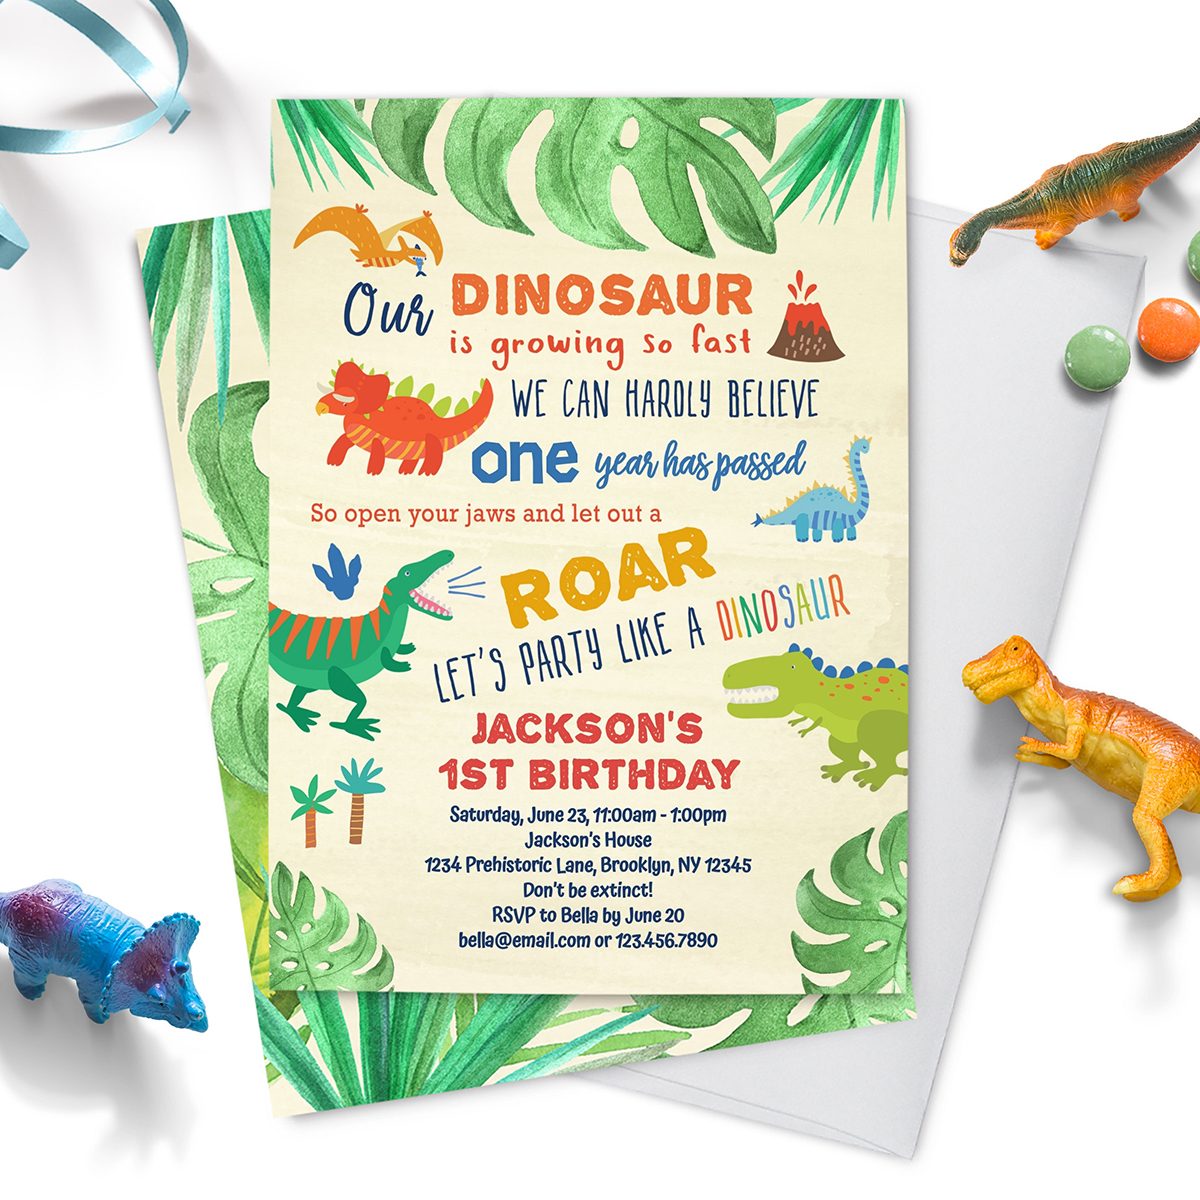 Coolest Dinosaur Games for a Dinosaur Birthday Party